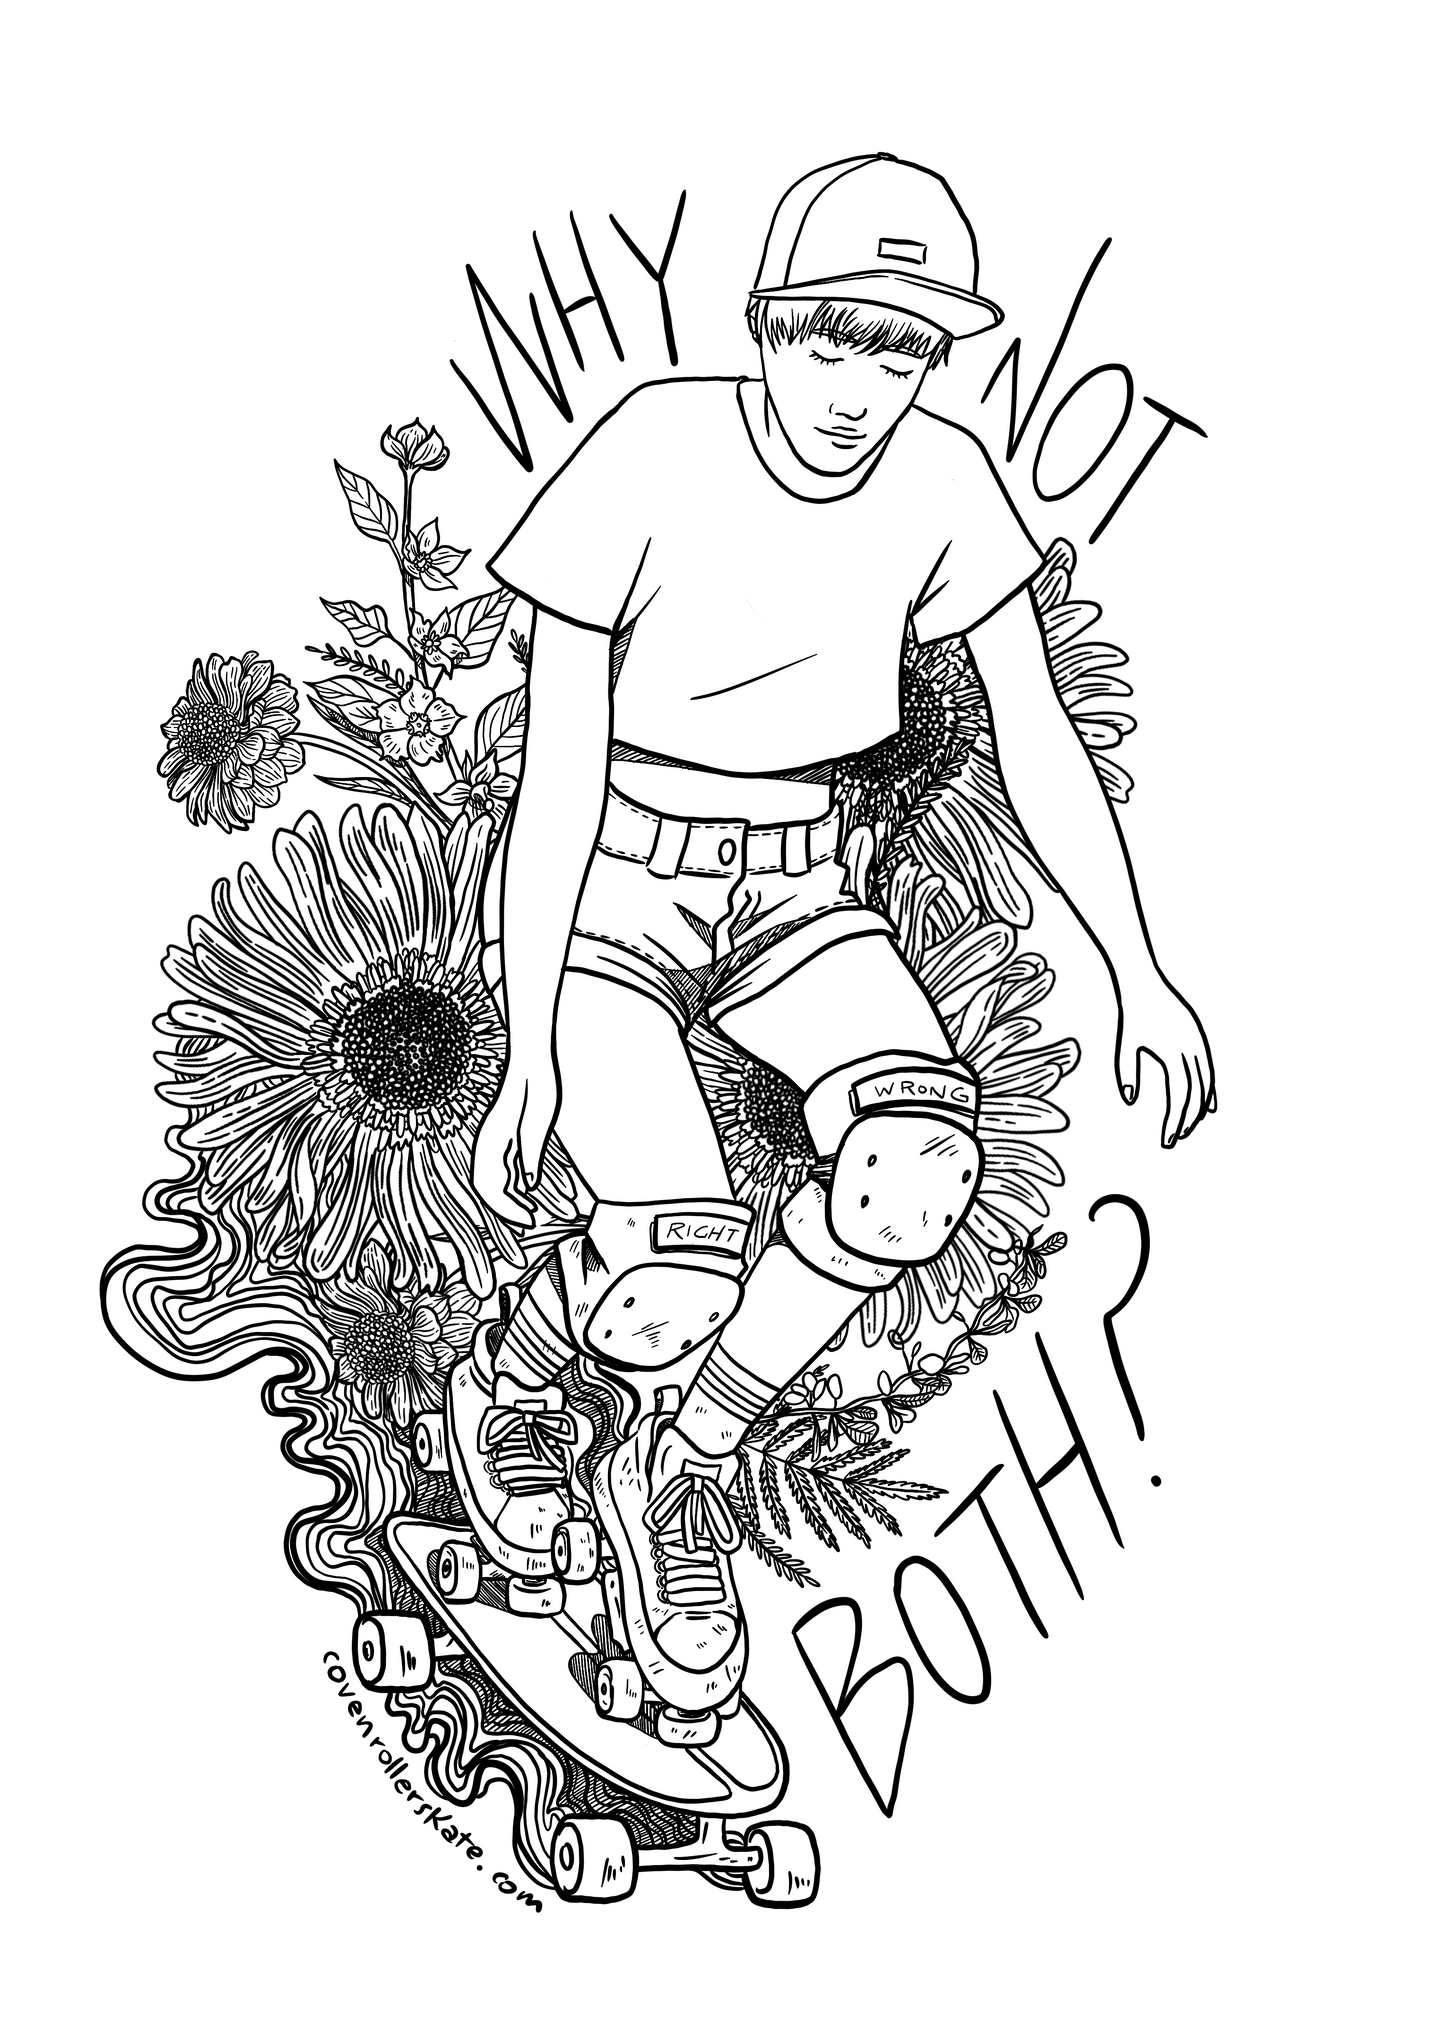 Tshirt WHY NOT BOTH? by Coven Rollerskate